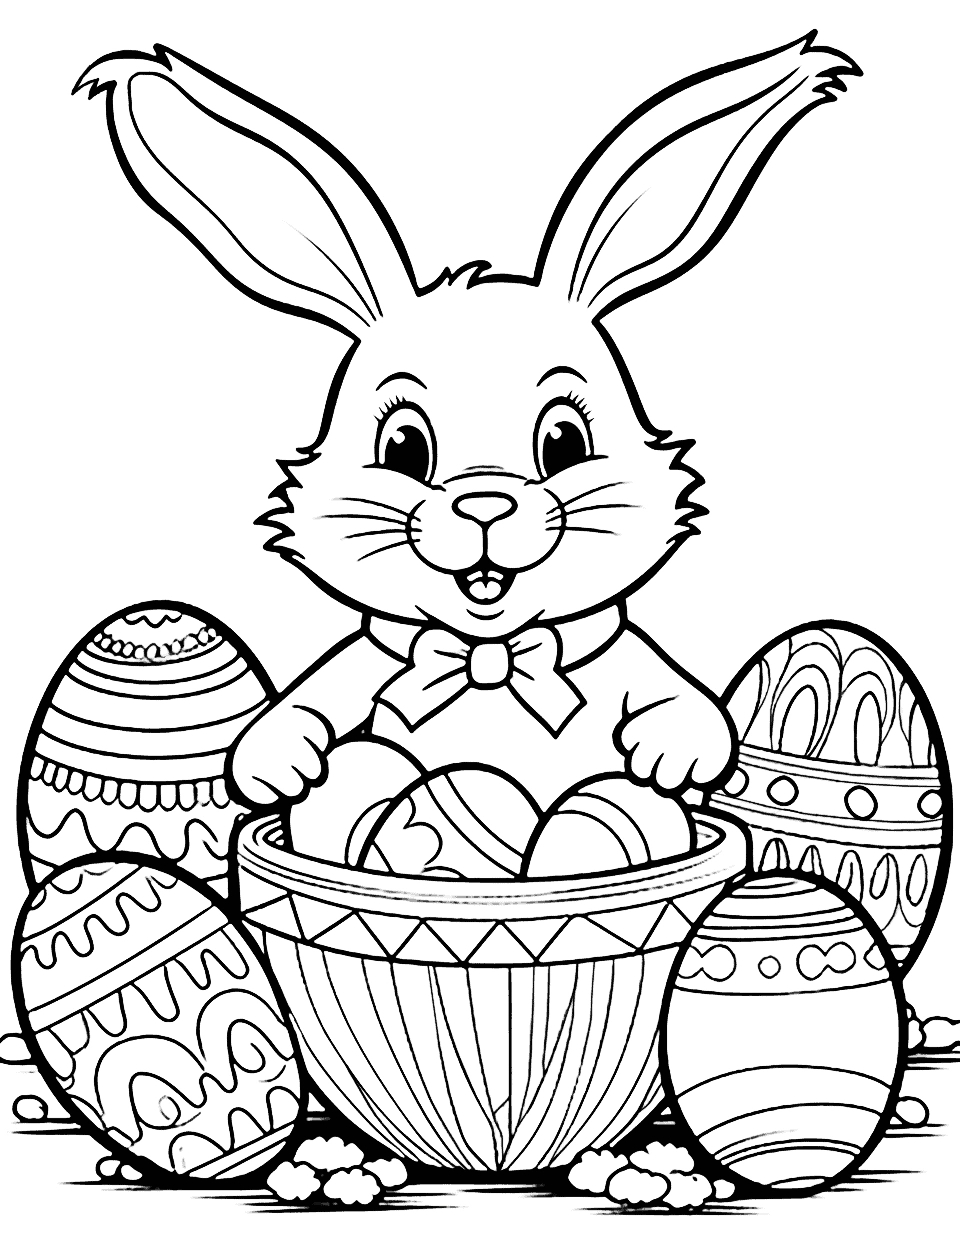 35 Easter Coloring Pages: Free Printable Sheets within Easter Color Pages Free Printable